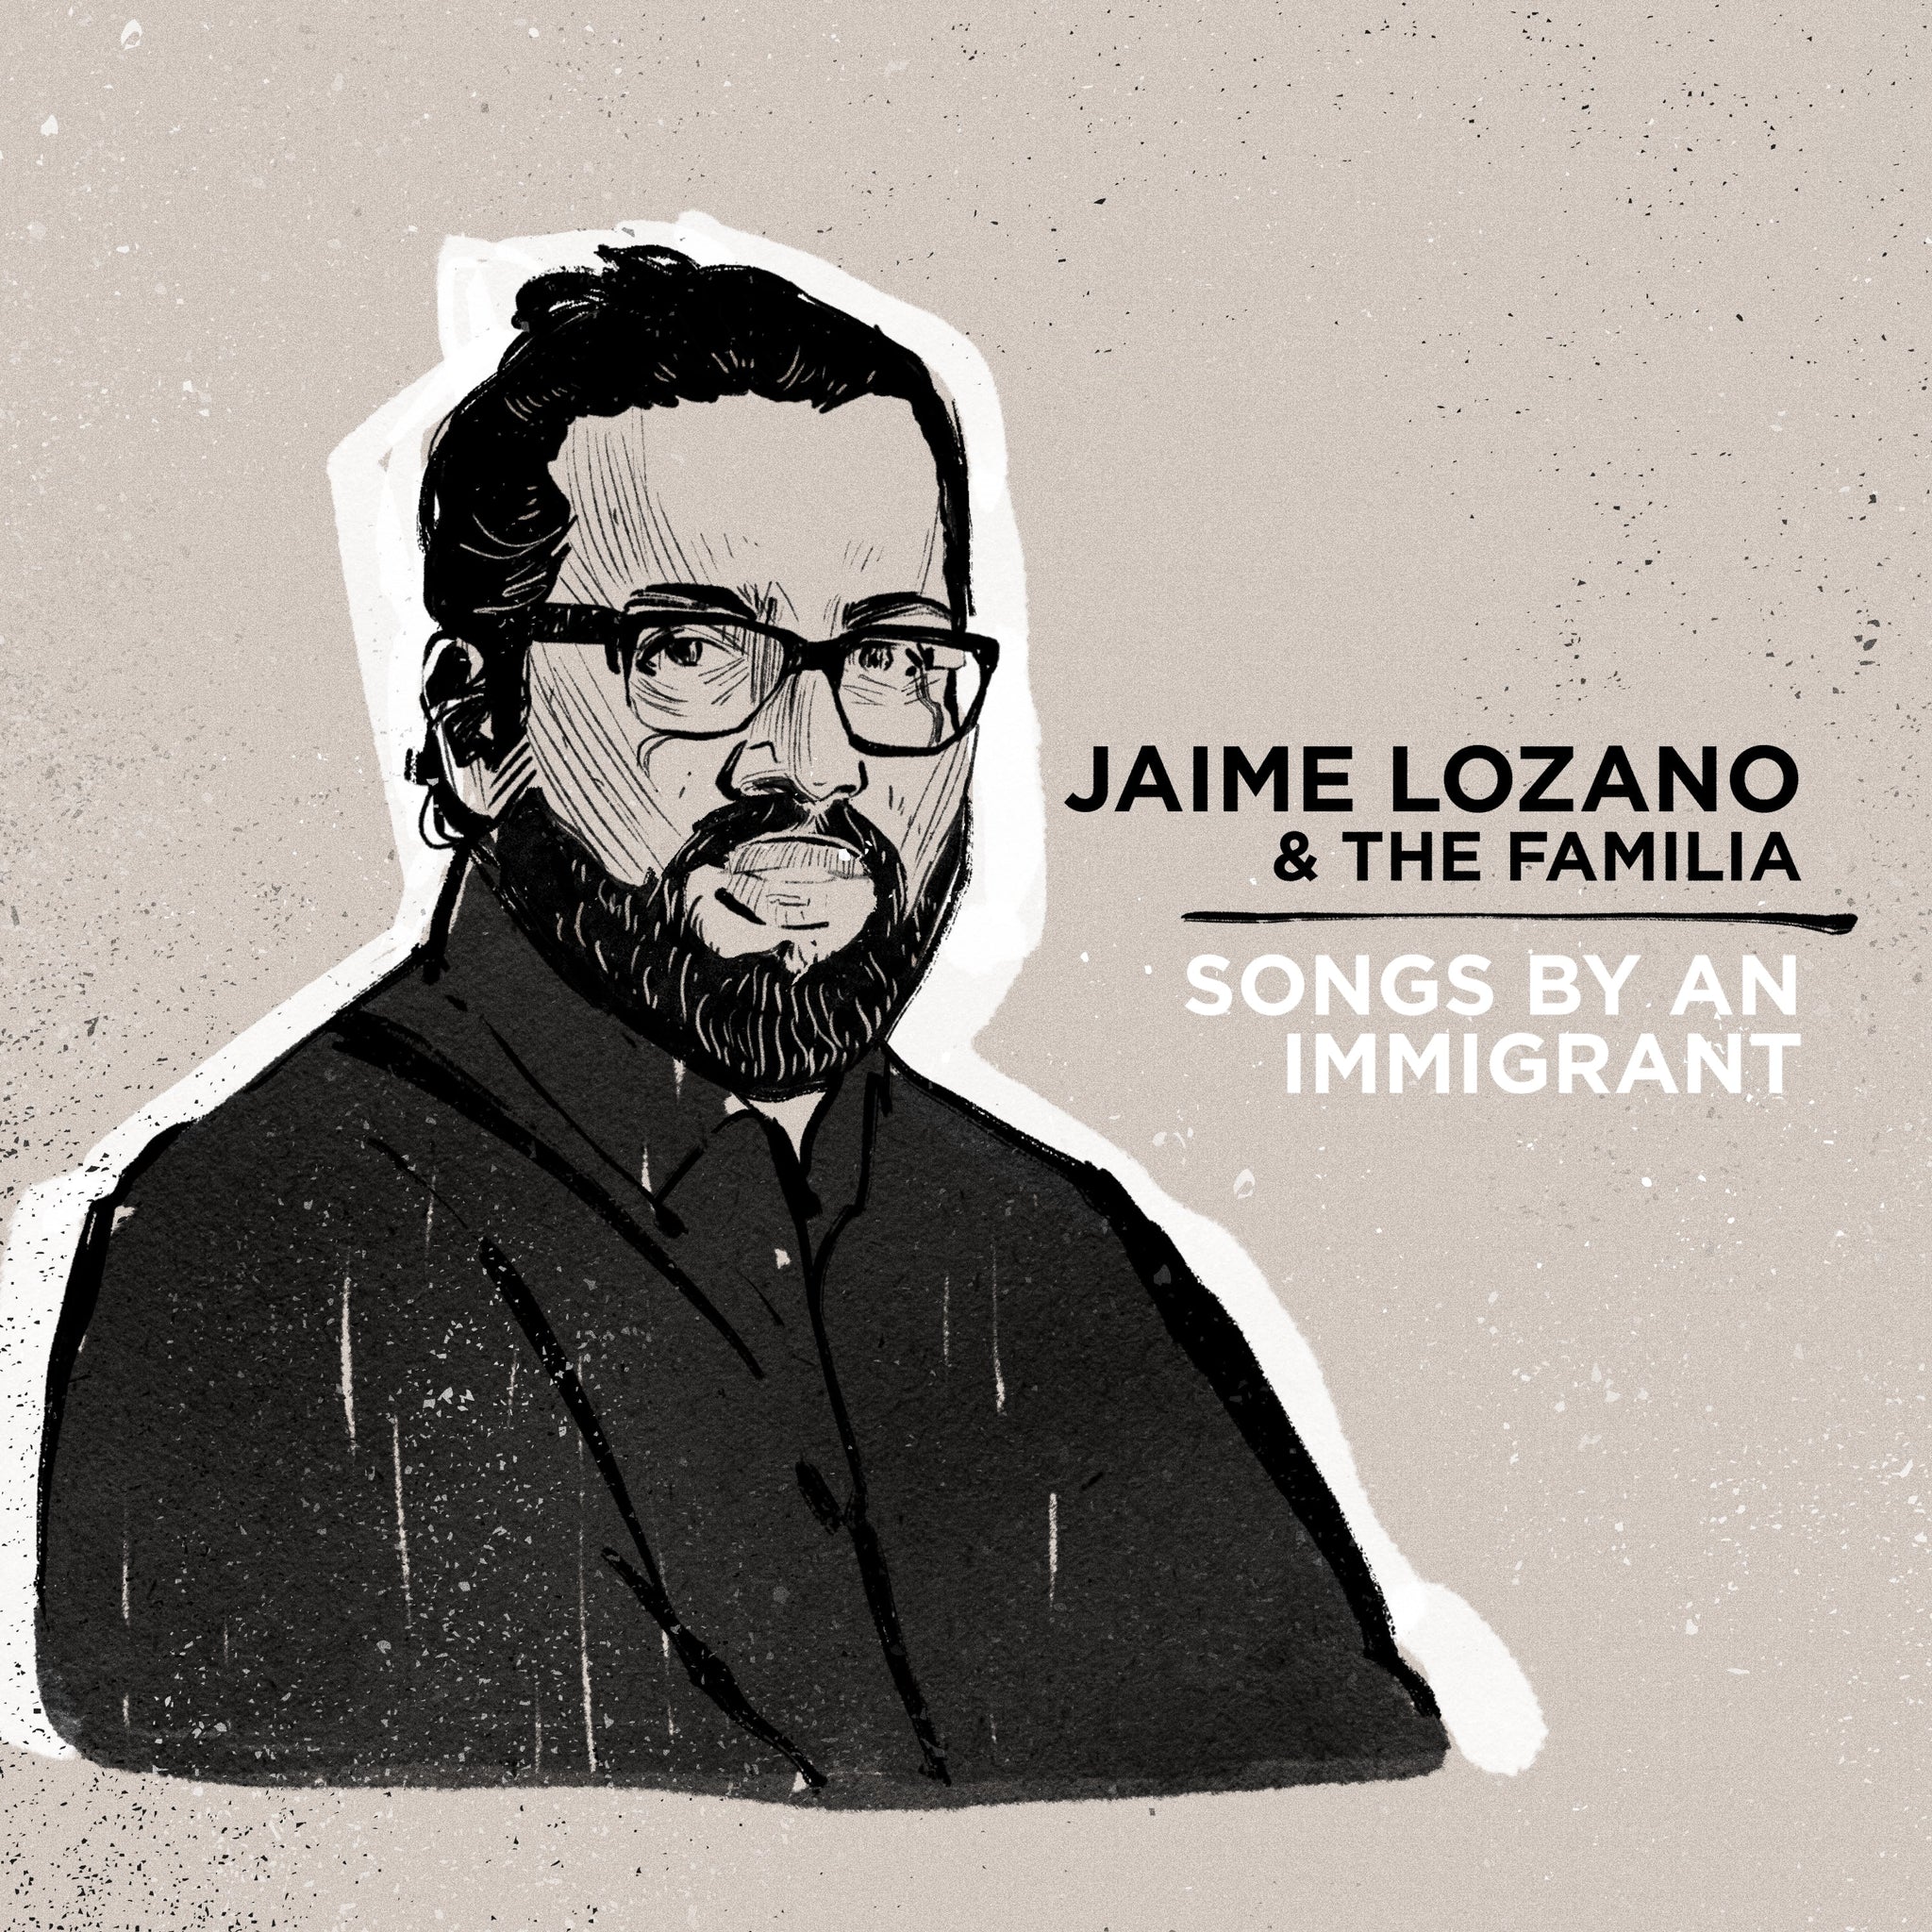 Jaime Lozano & The Familia: Songs By an Immigrant [MP3]